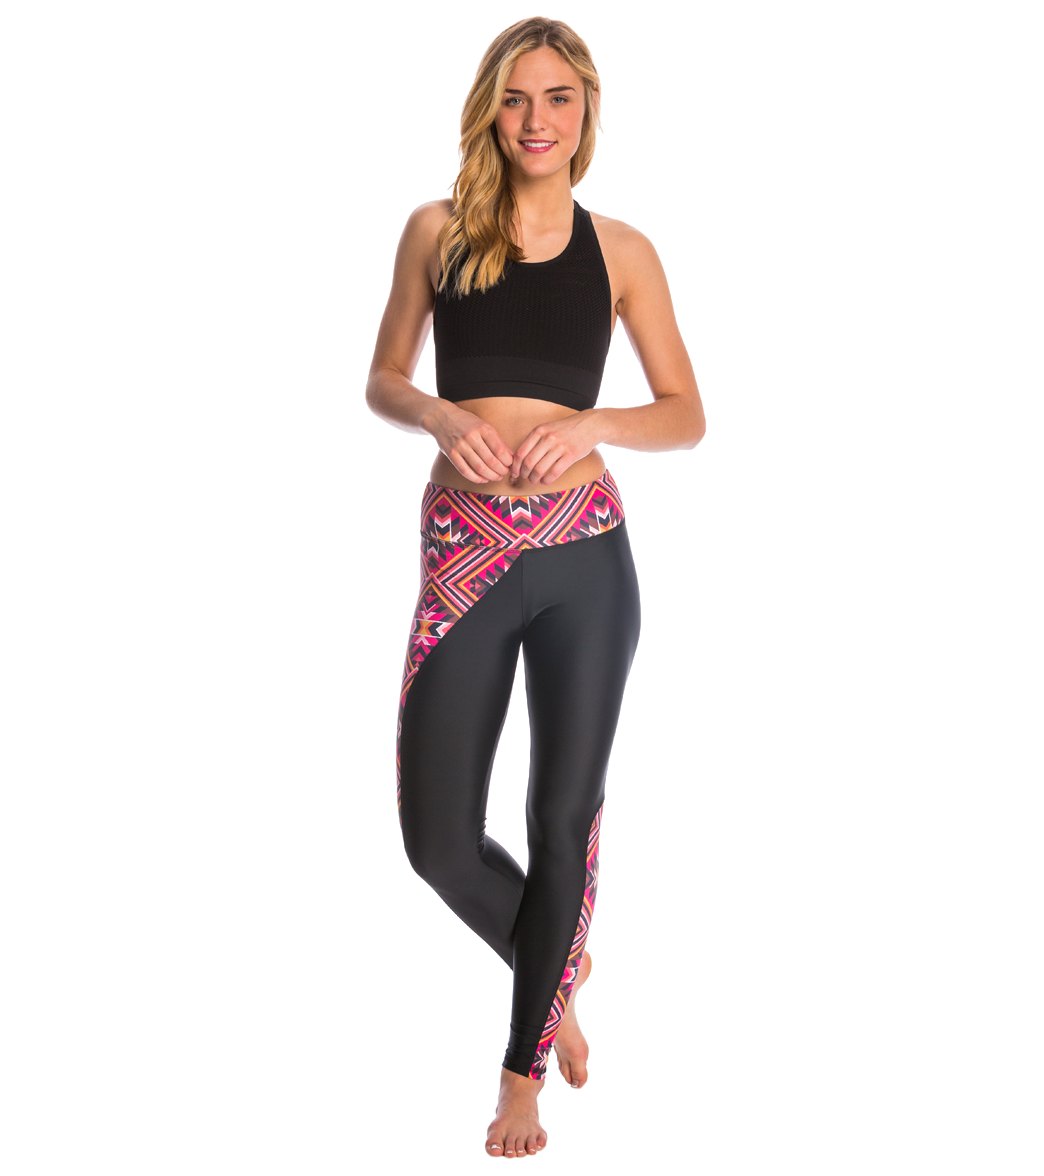 Jala Clothing's Stand Up Paddleboarding Legging in fun prints is